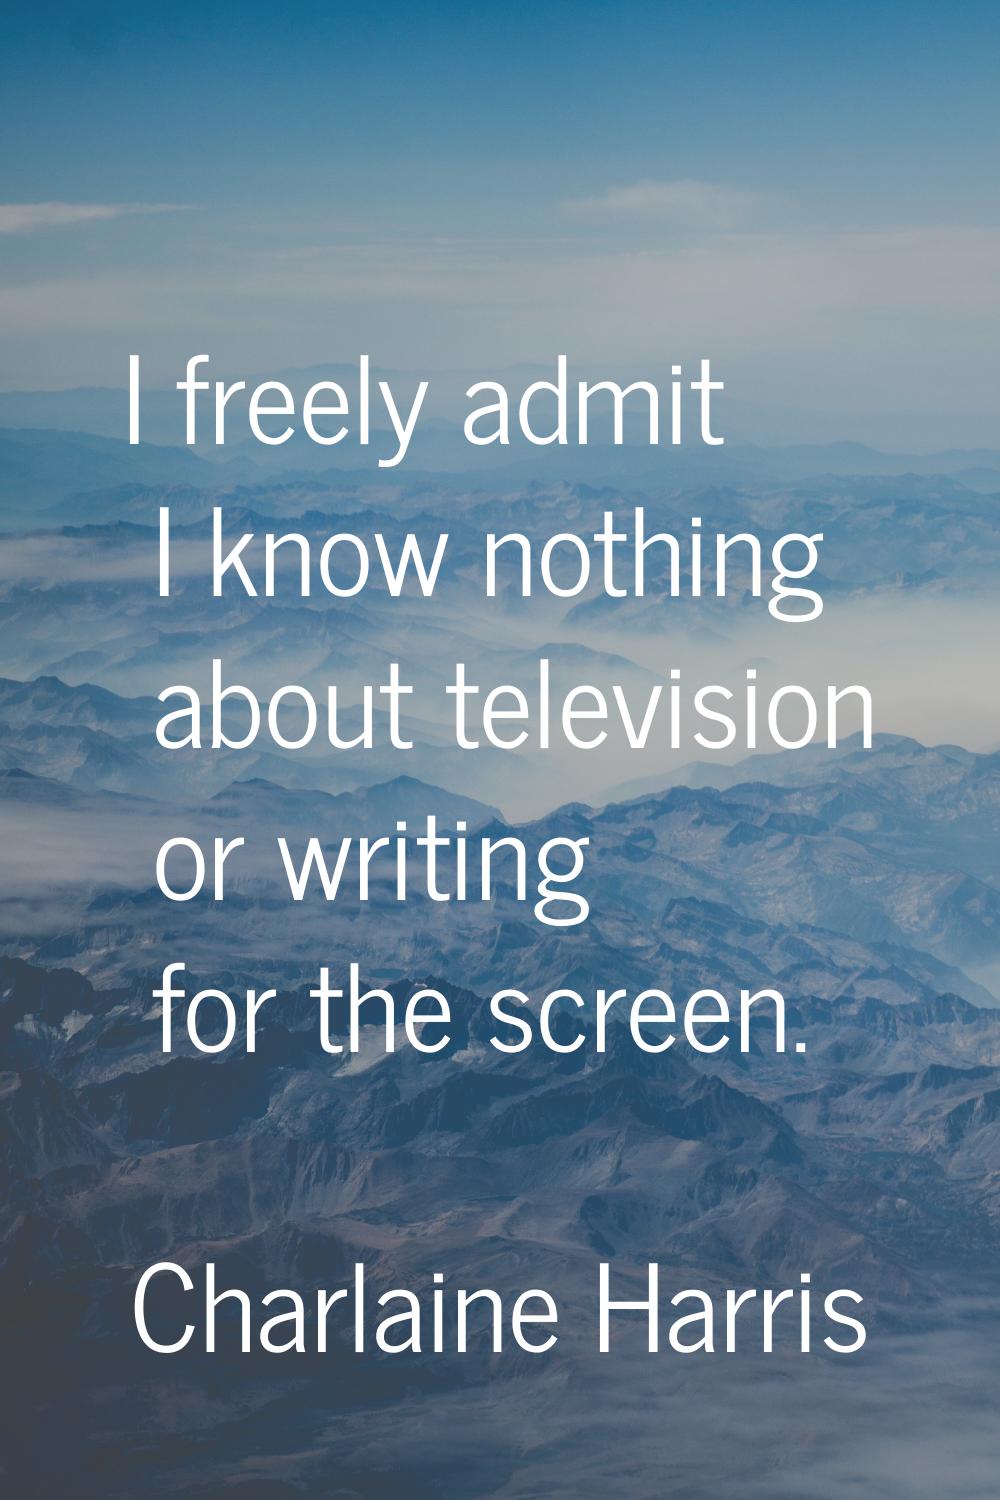 I freely admit I know nothing about television or writing for the screen.